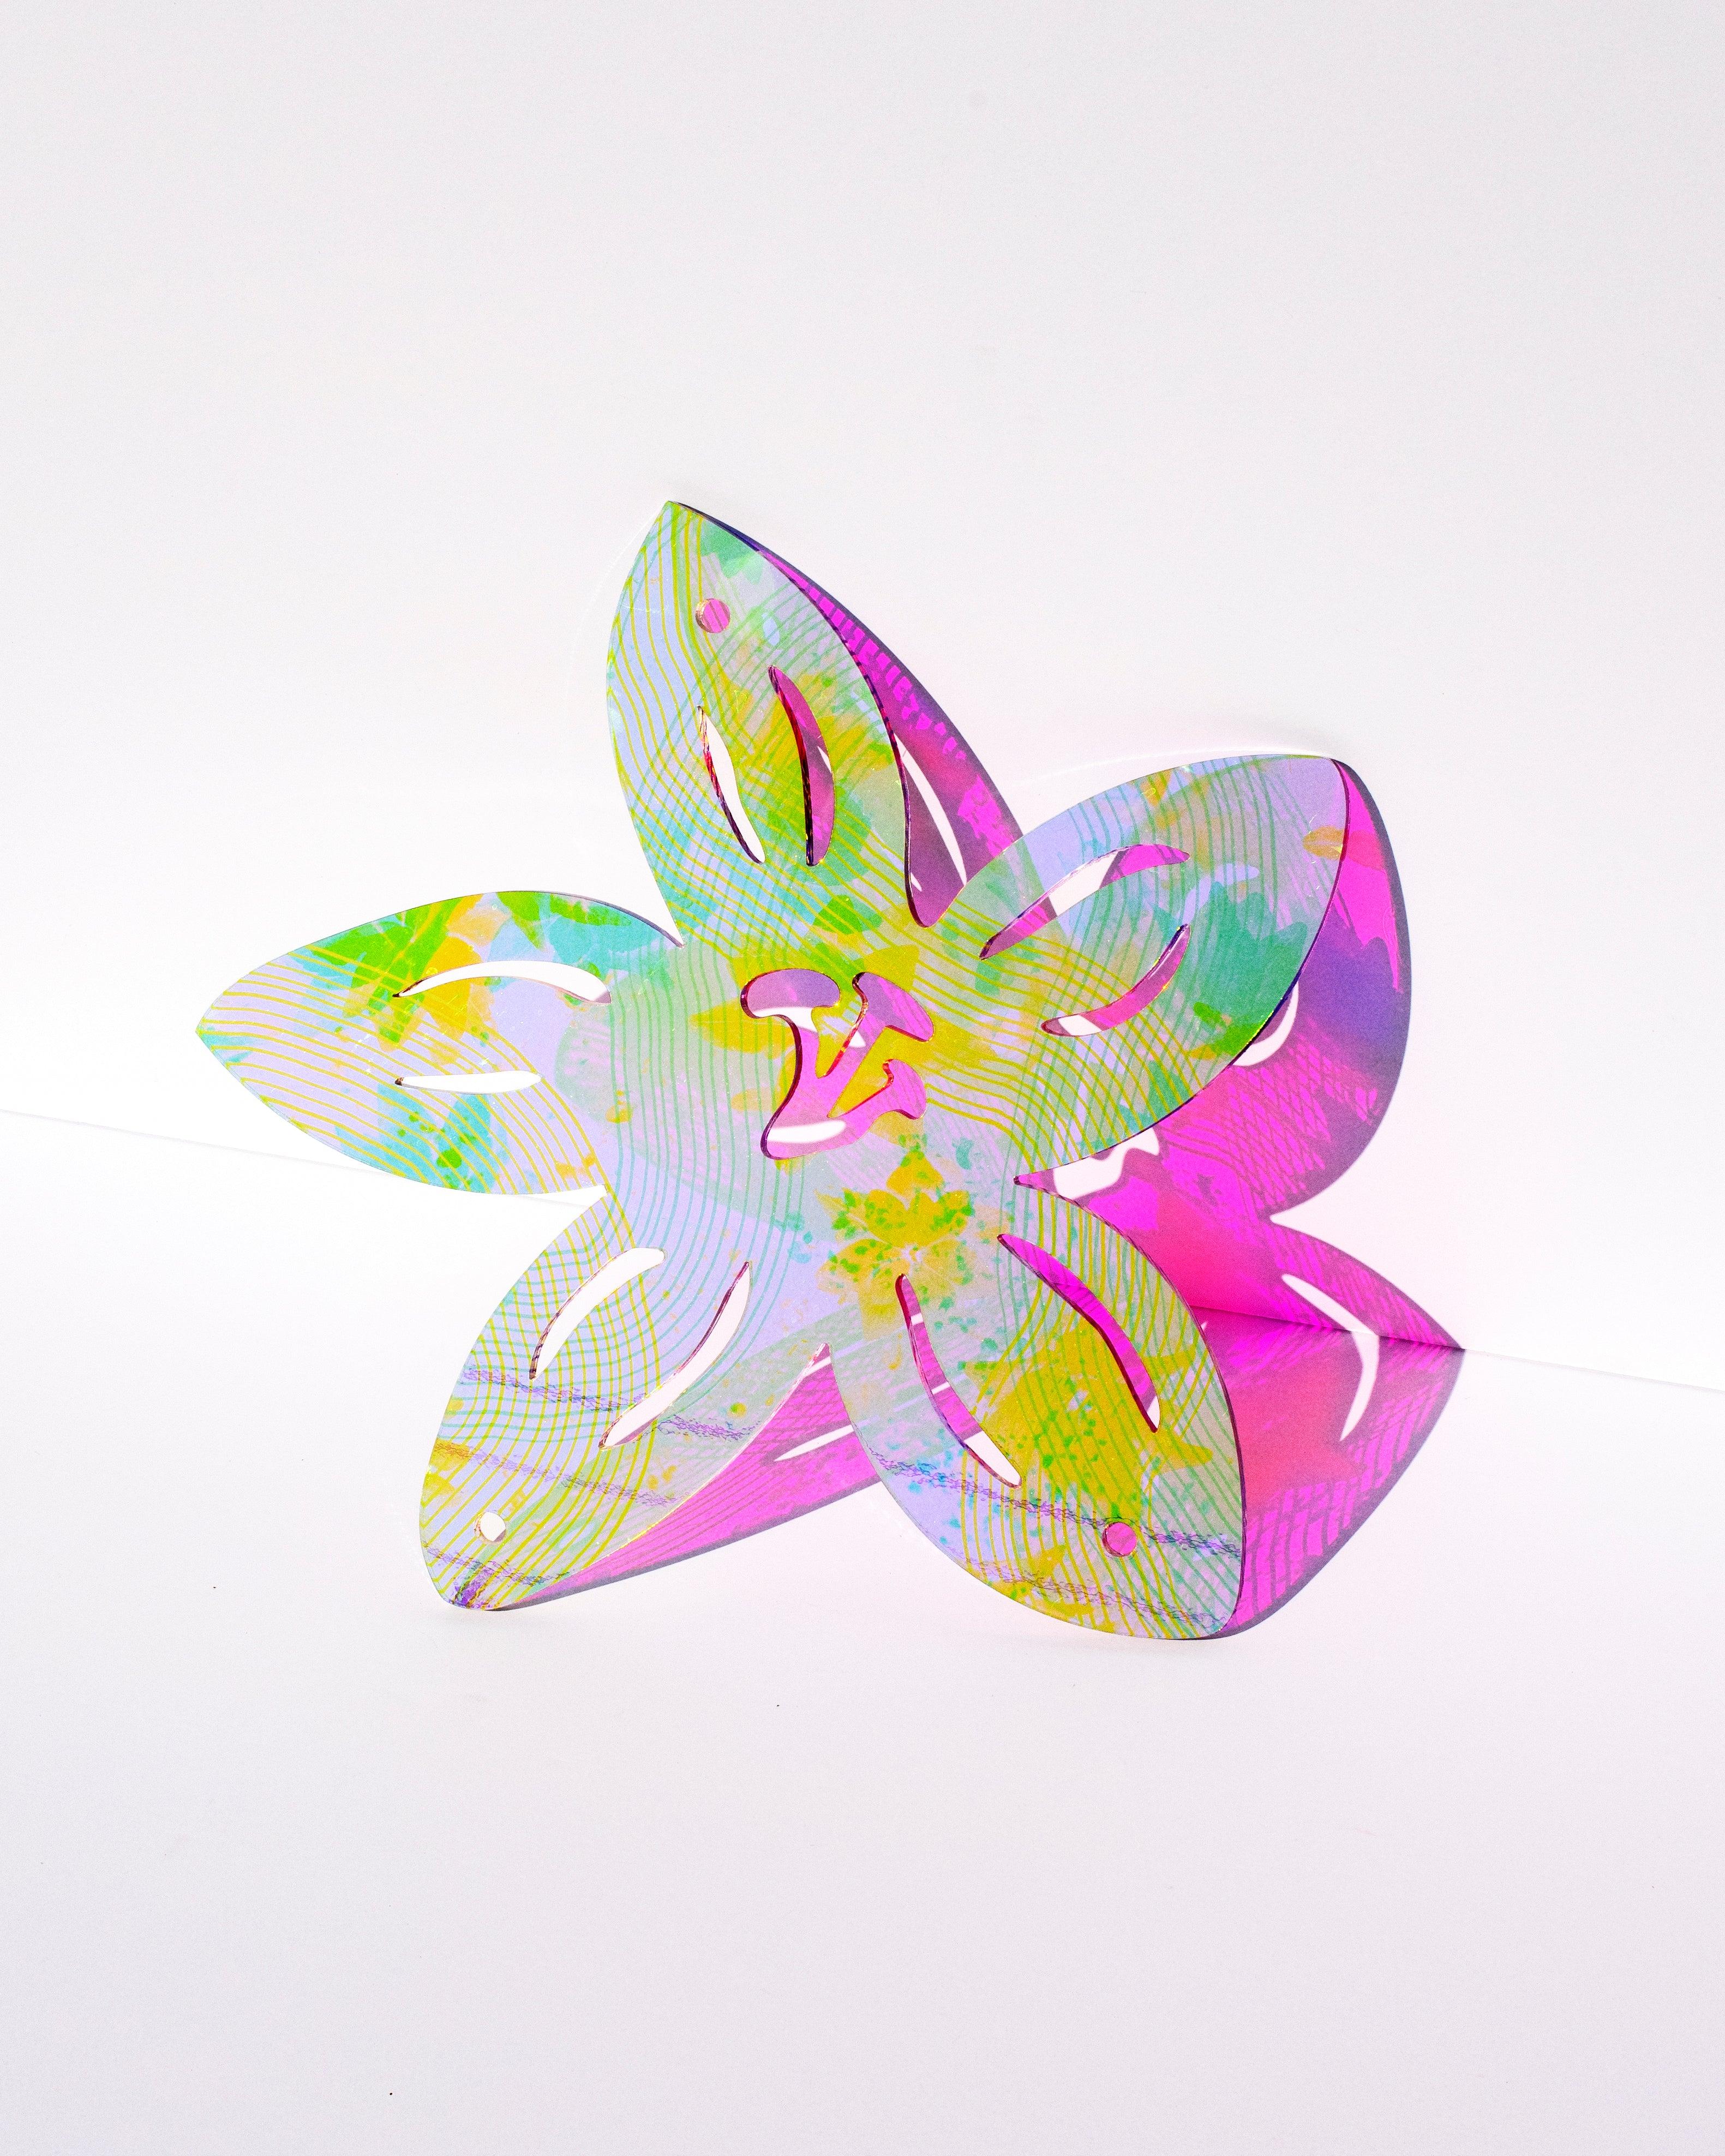 Lily - contemporary floral mirrored hanging sculpture, vibrant printed acrylic - Sculpture by Roxana Azar